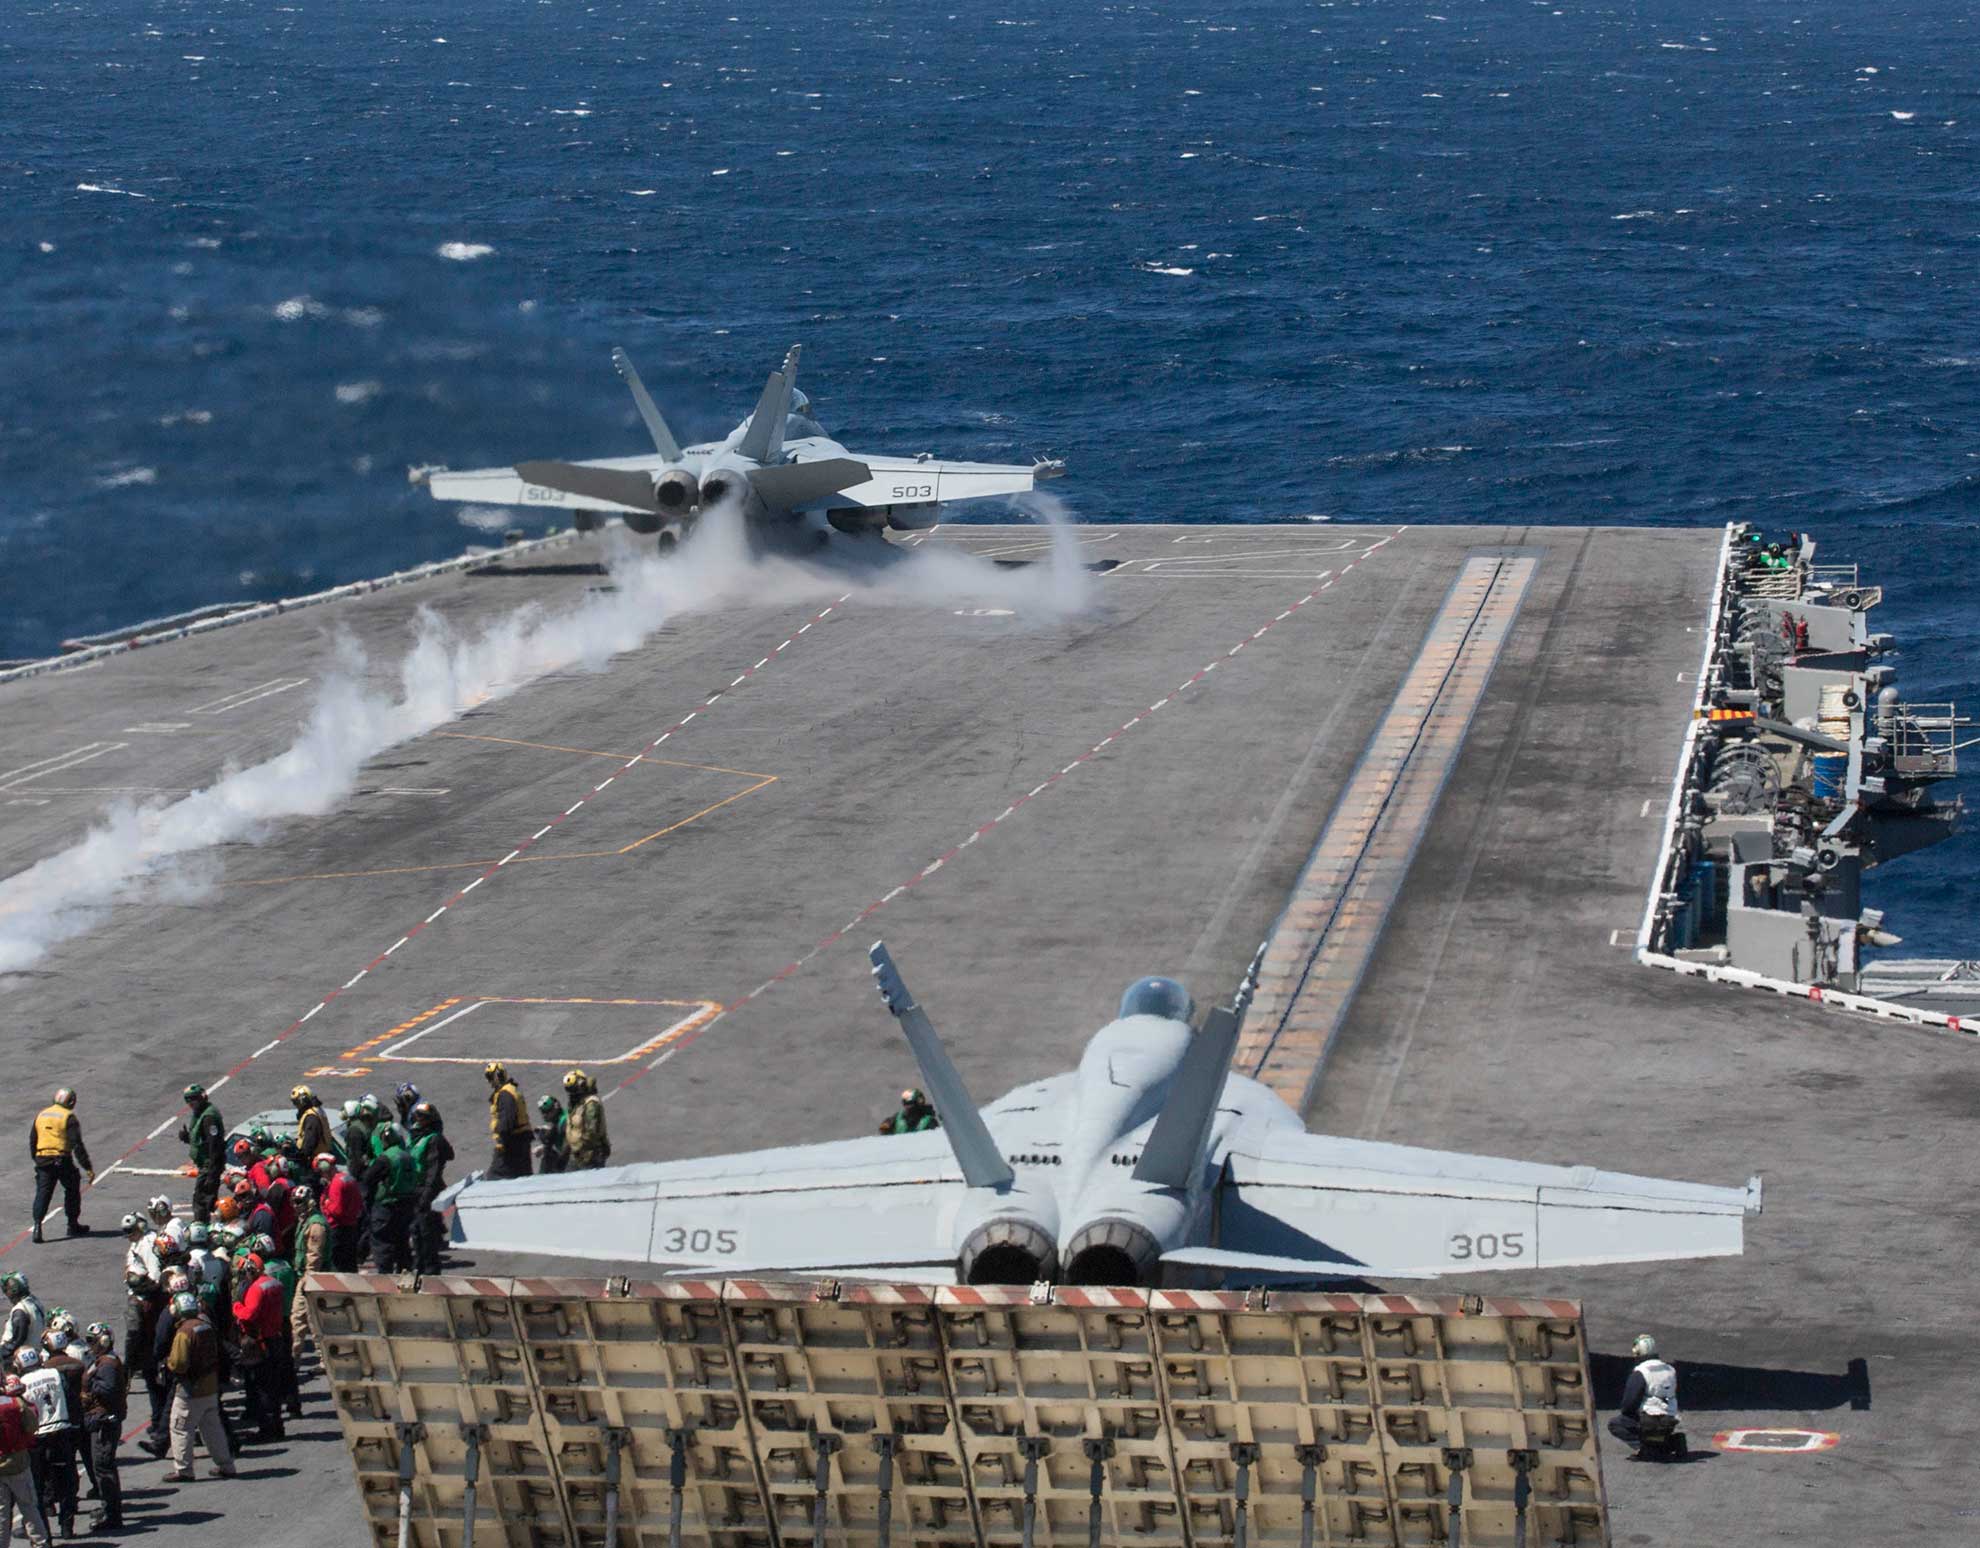 Atlantic Ocean (April 3, 2019) An EA-18G Growler assigned to the "'Patriots" of Electronic Attack Squadron (VAQ) 140 launches from the flight deck of the Nimitz-class aircraft carrier USS Abraham Lincoln (CVN 72). Abraham Lincoln is underway as part of the Abraham Lincoln Carrier Strike Group deployment in support of maritime security cooperation efforts in the U.S. 5th, 6th and 7th Fleet areas of responsibility. With Abraham Lincoln as the flagship, deployed strike group assets include staffs, ships and aircraft of Carrier Strike Group (CSG) 12, Destroyer Squadron (DESRON) 2, USS Leyte Gulf (CG 55) and Carrier Air Wing (CVW) 7; as well as the Spanish navy Alvaro de Bazan-class frigate ESPS Mendez Nñez (F 104) -- U.S. Navy photo by MCS Seaman Tristan Kyle Labuguen. -